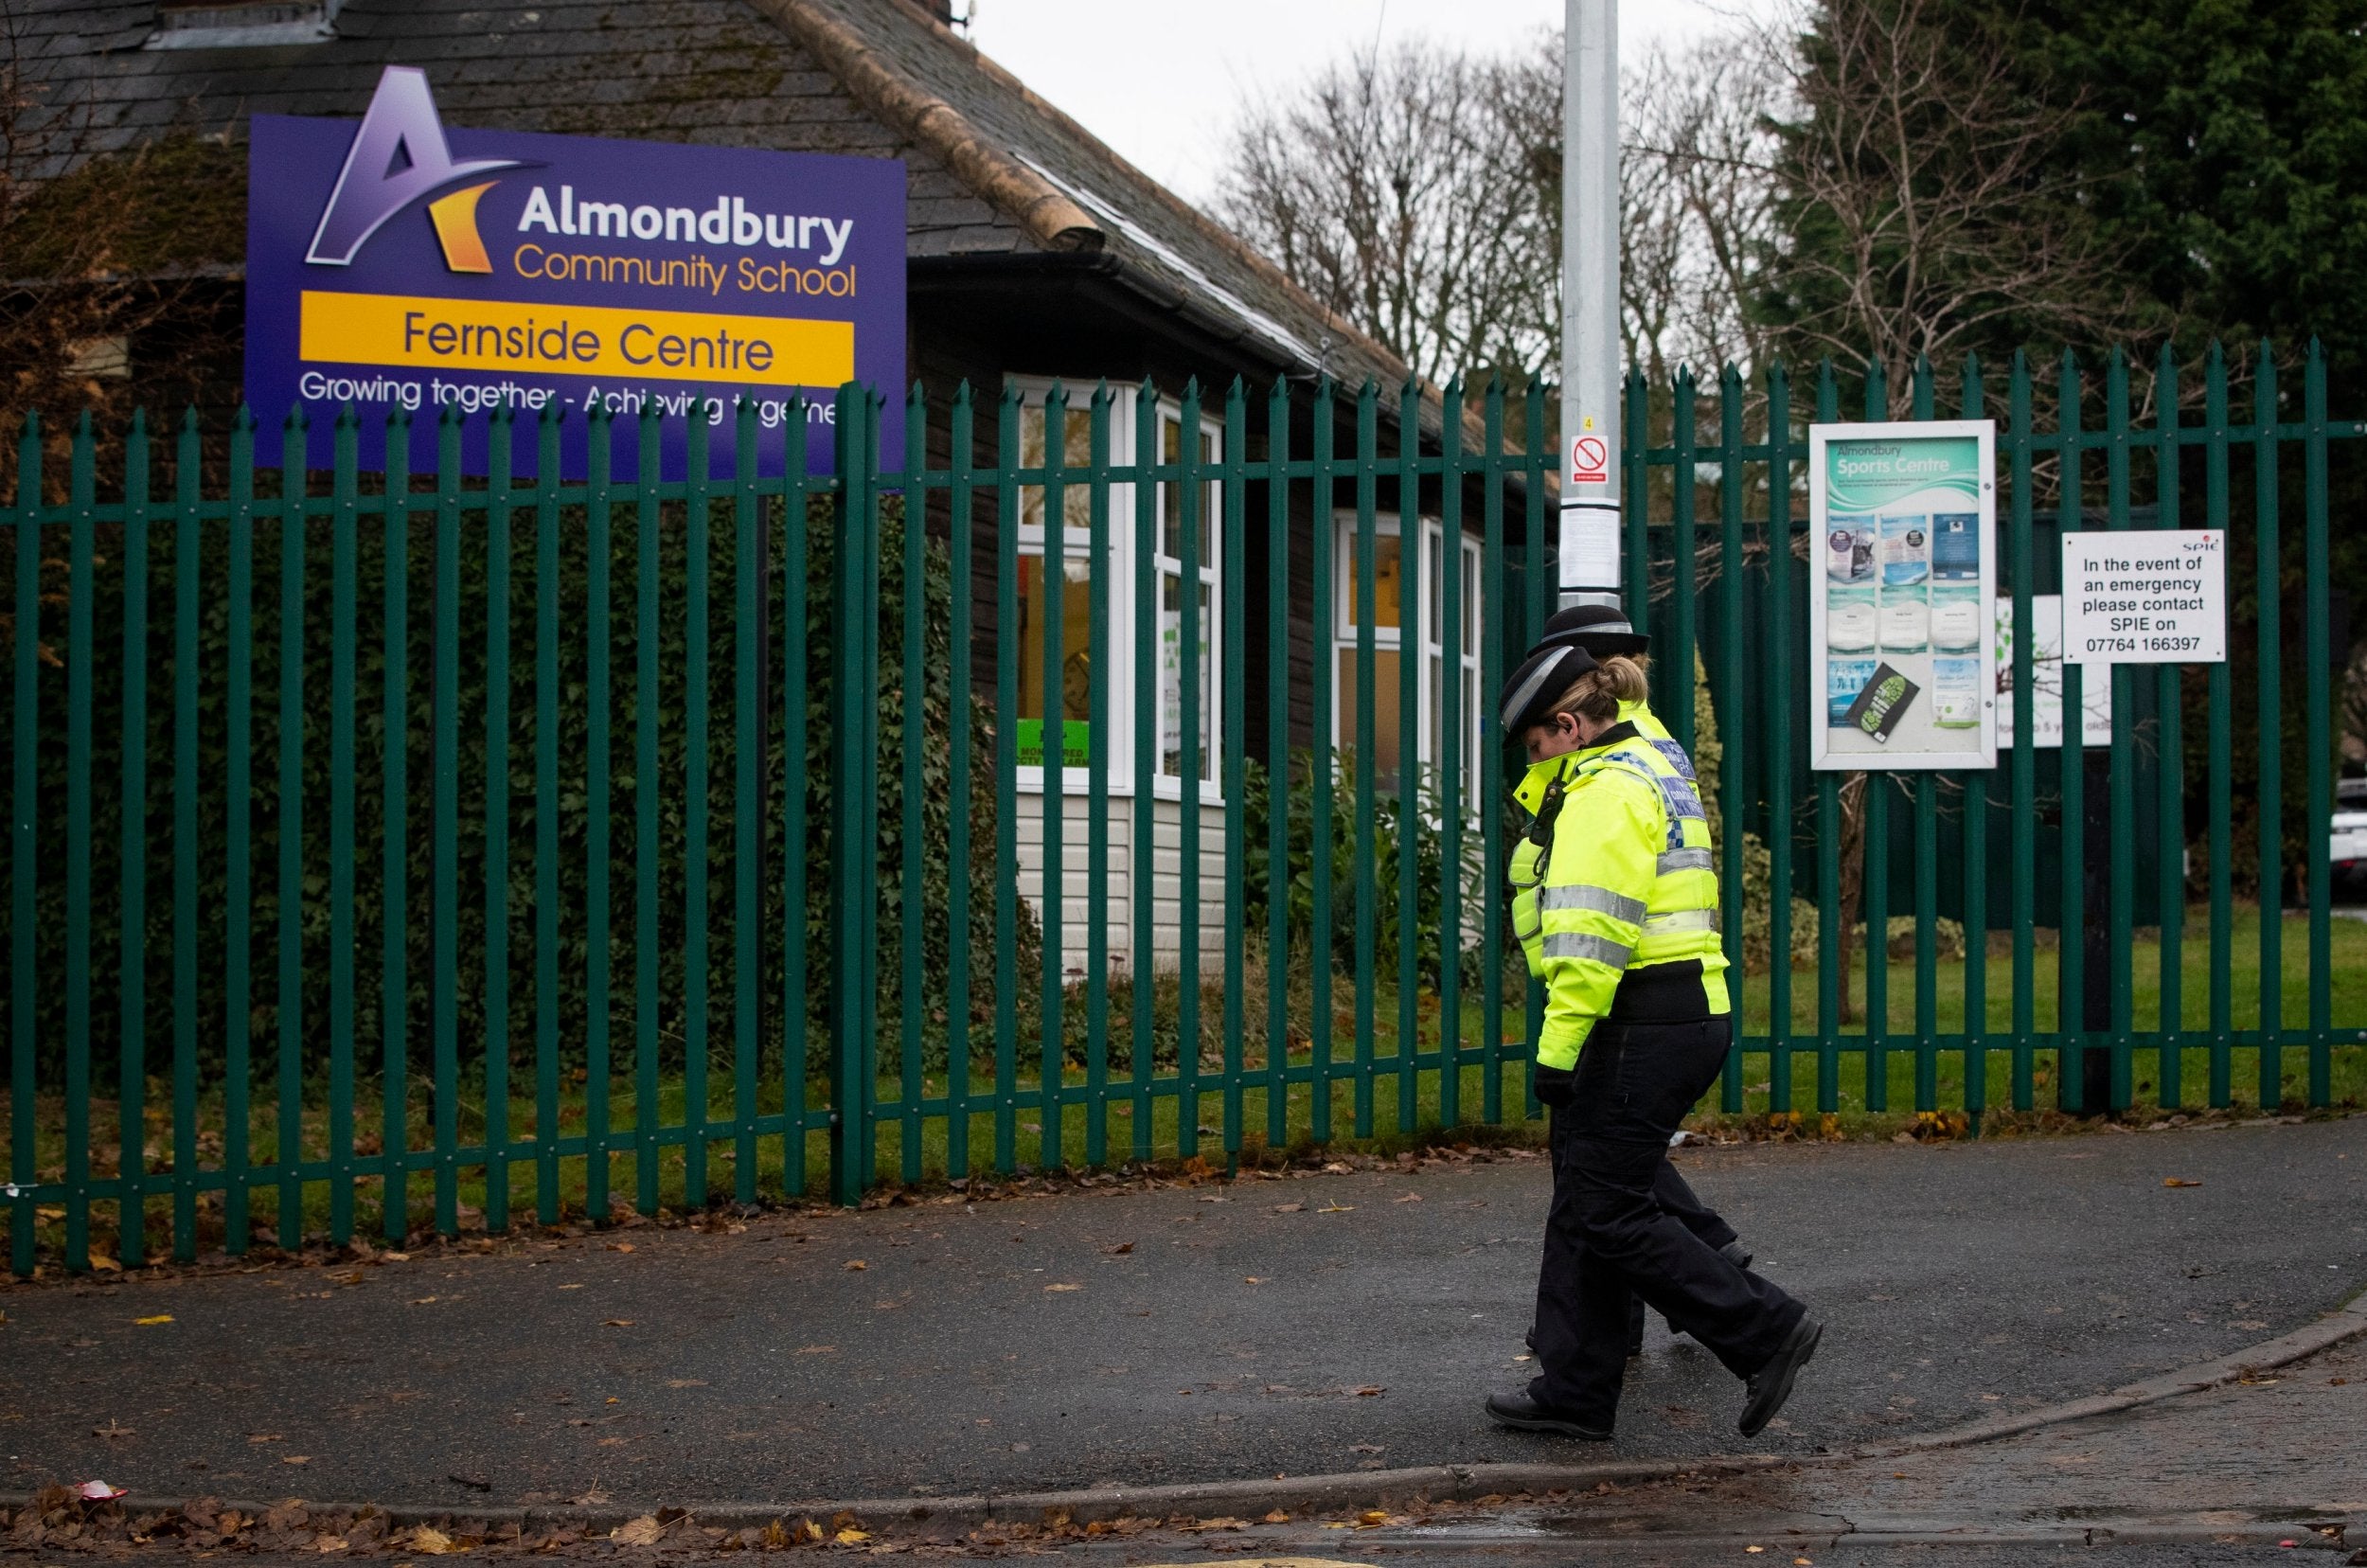 The headmaster of Almondbury Community School in Huddersfield said the situation was ‘being taken extremely seriously’